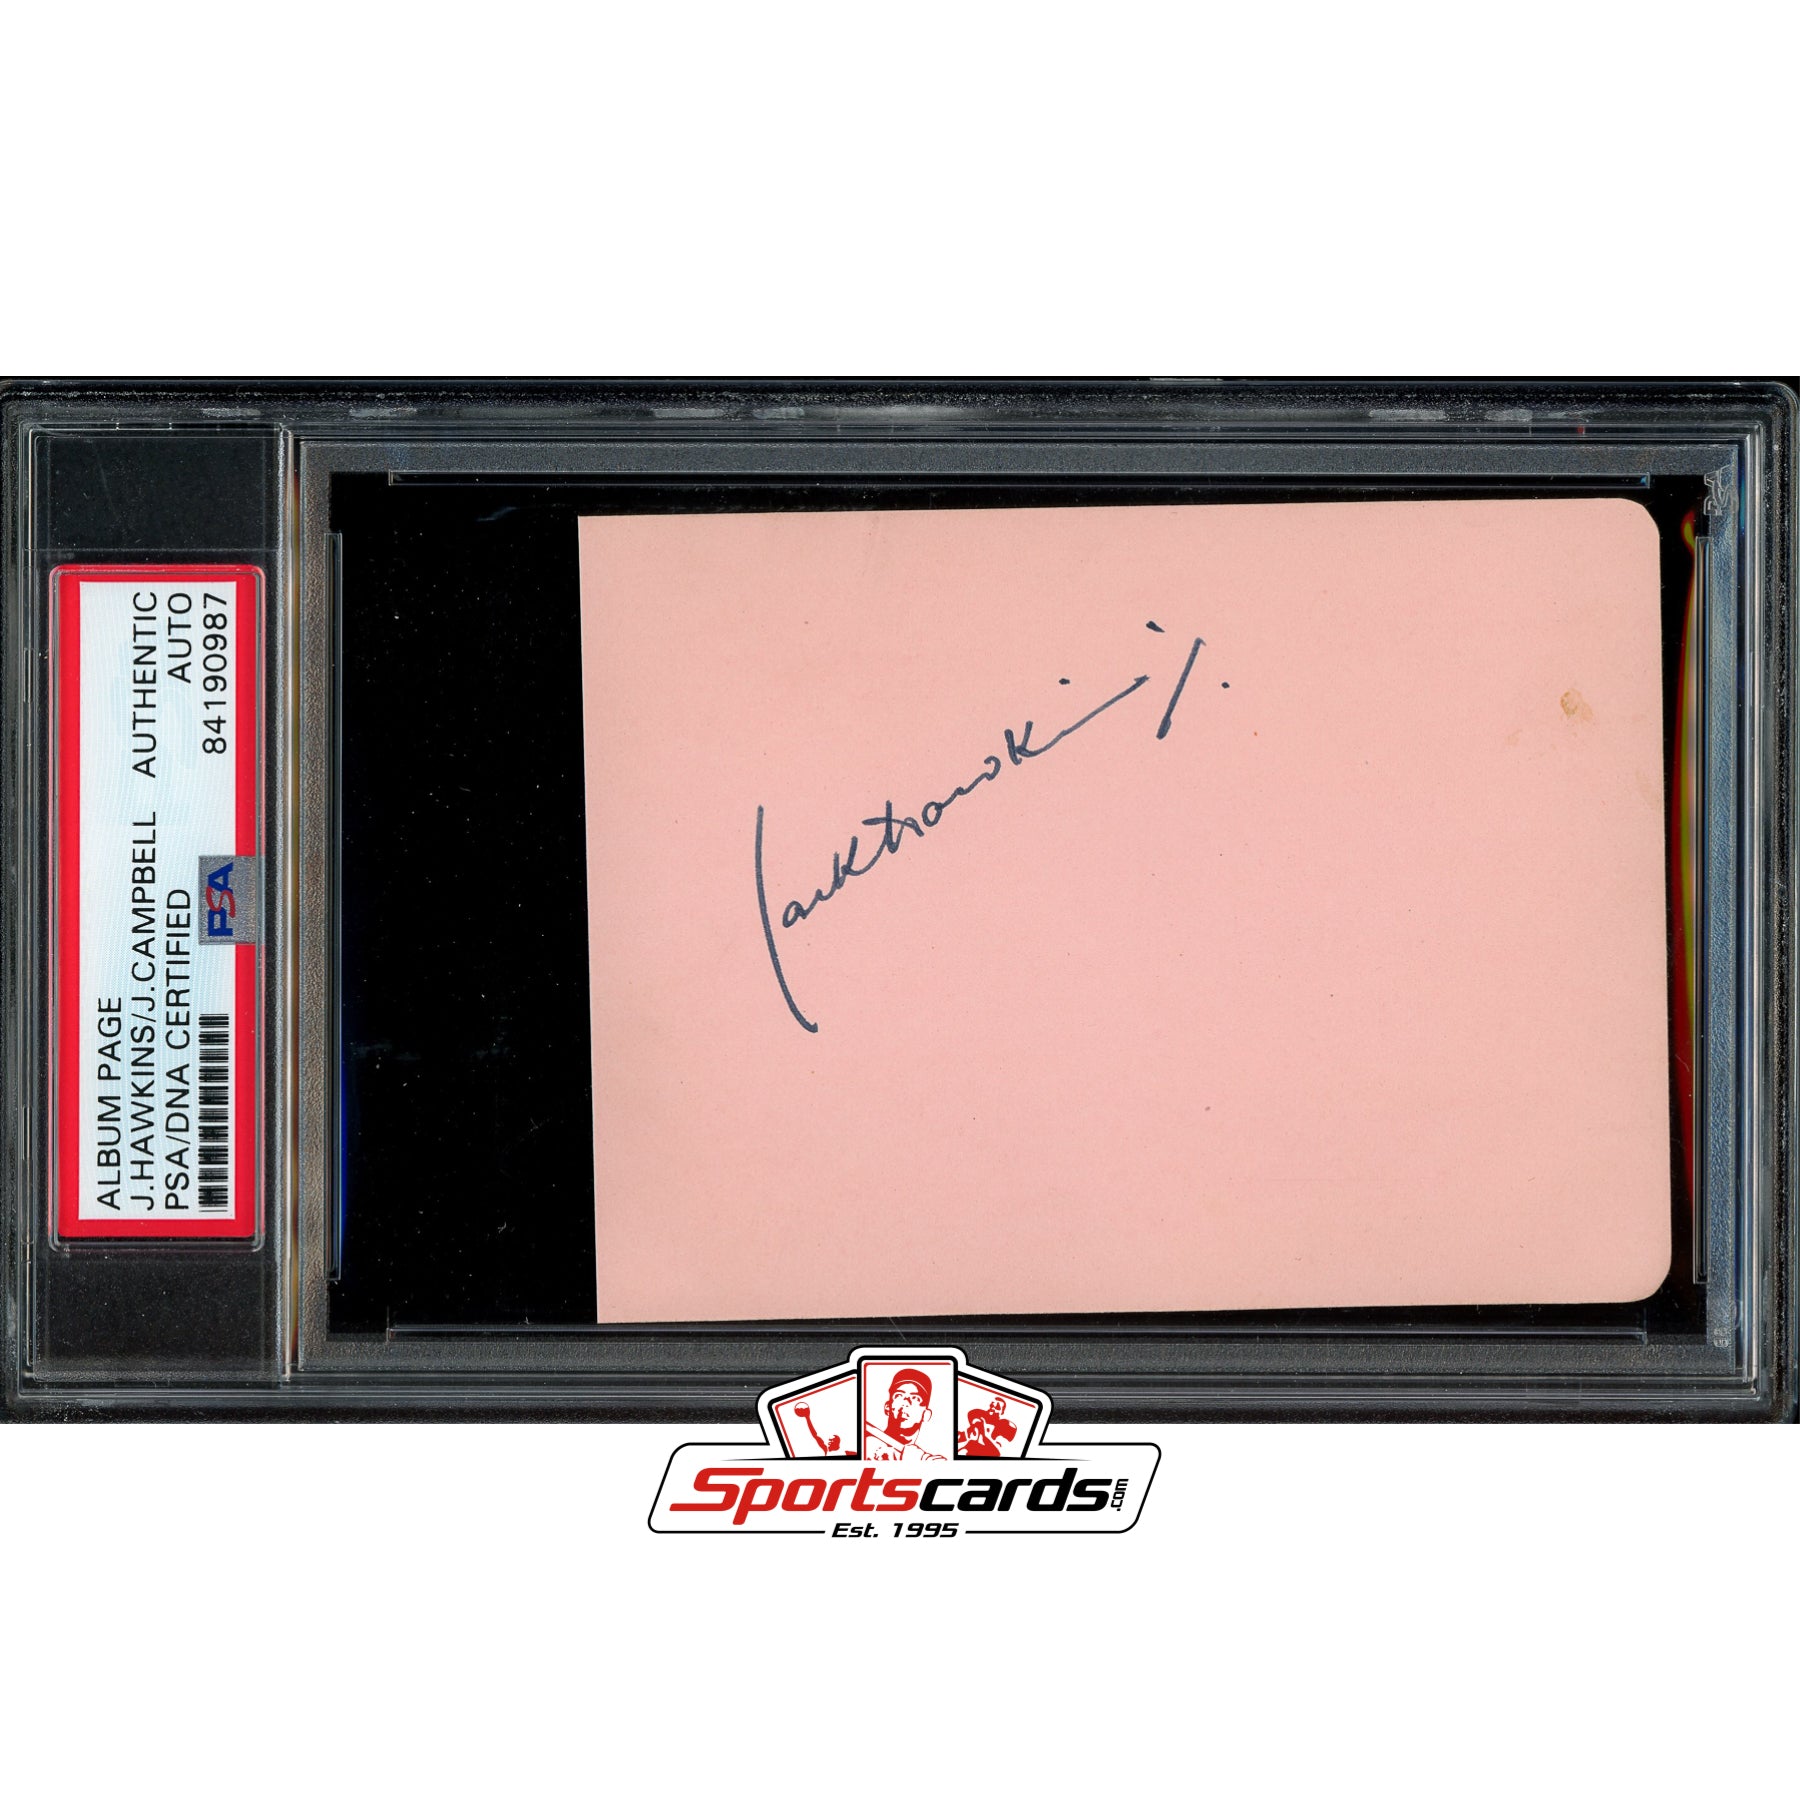 Judy Campbell & Jack Hawkins Autograph Signed Album Page PSA